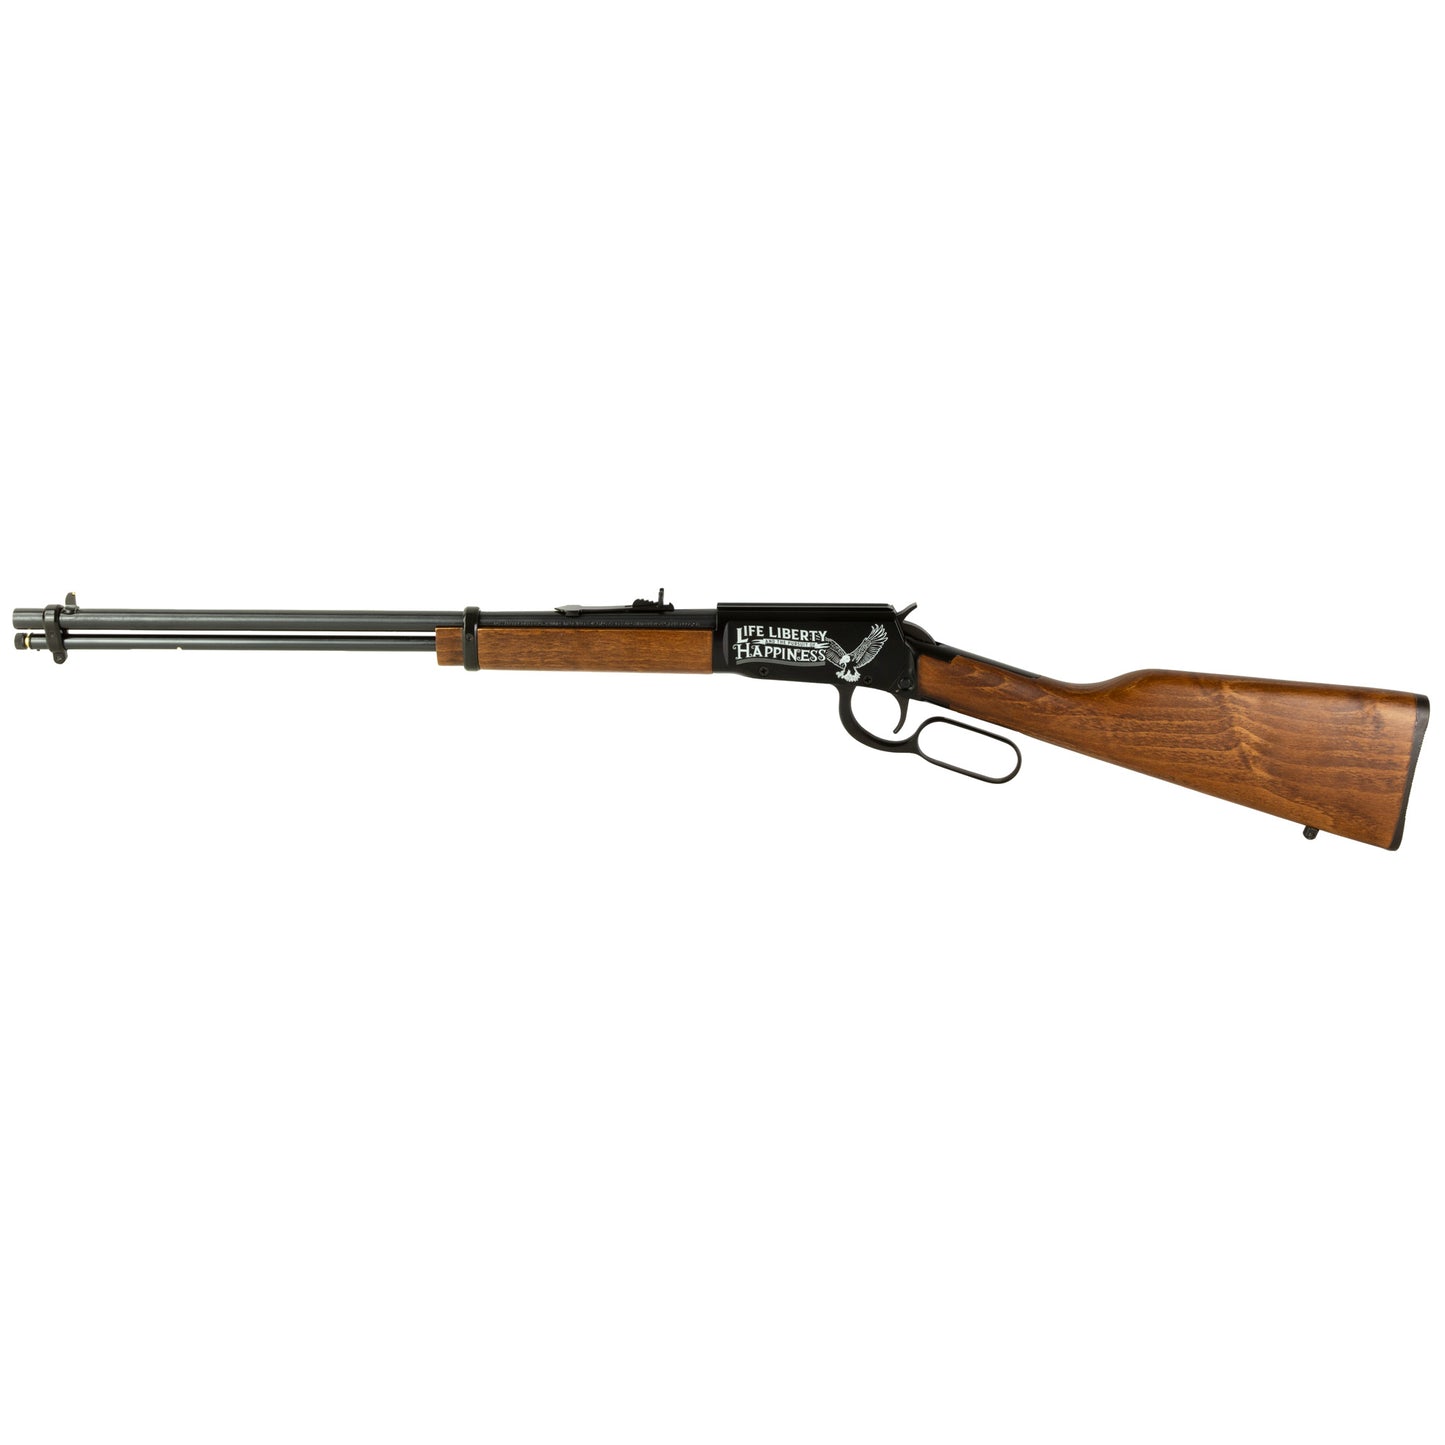 Rossi, Rio Bravo, Lever Action, 22 WMR, 20" Barrel, Adjustable Sights, Wood Stock, "Life, Liberty, and the Pursuit of Happiness" Engraved on Receiver, 12Rounds